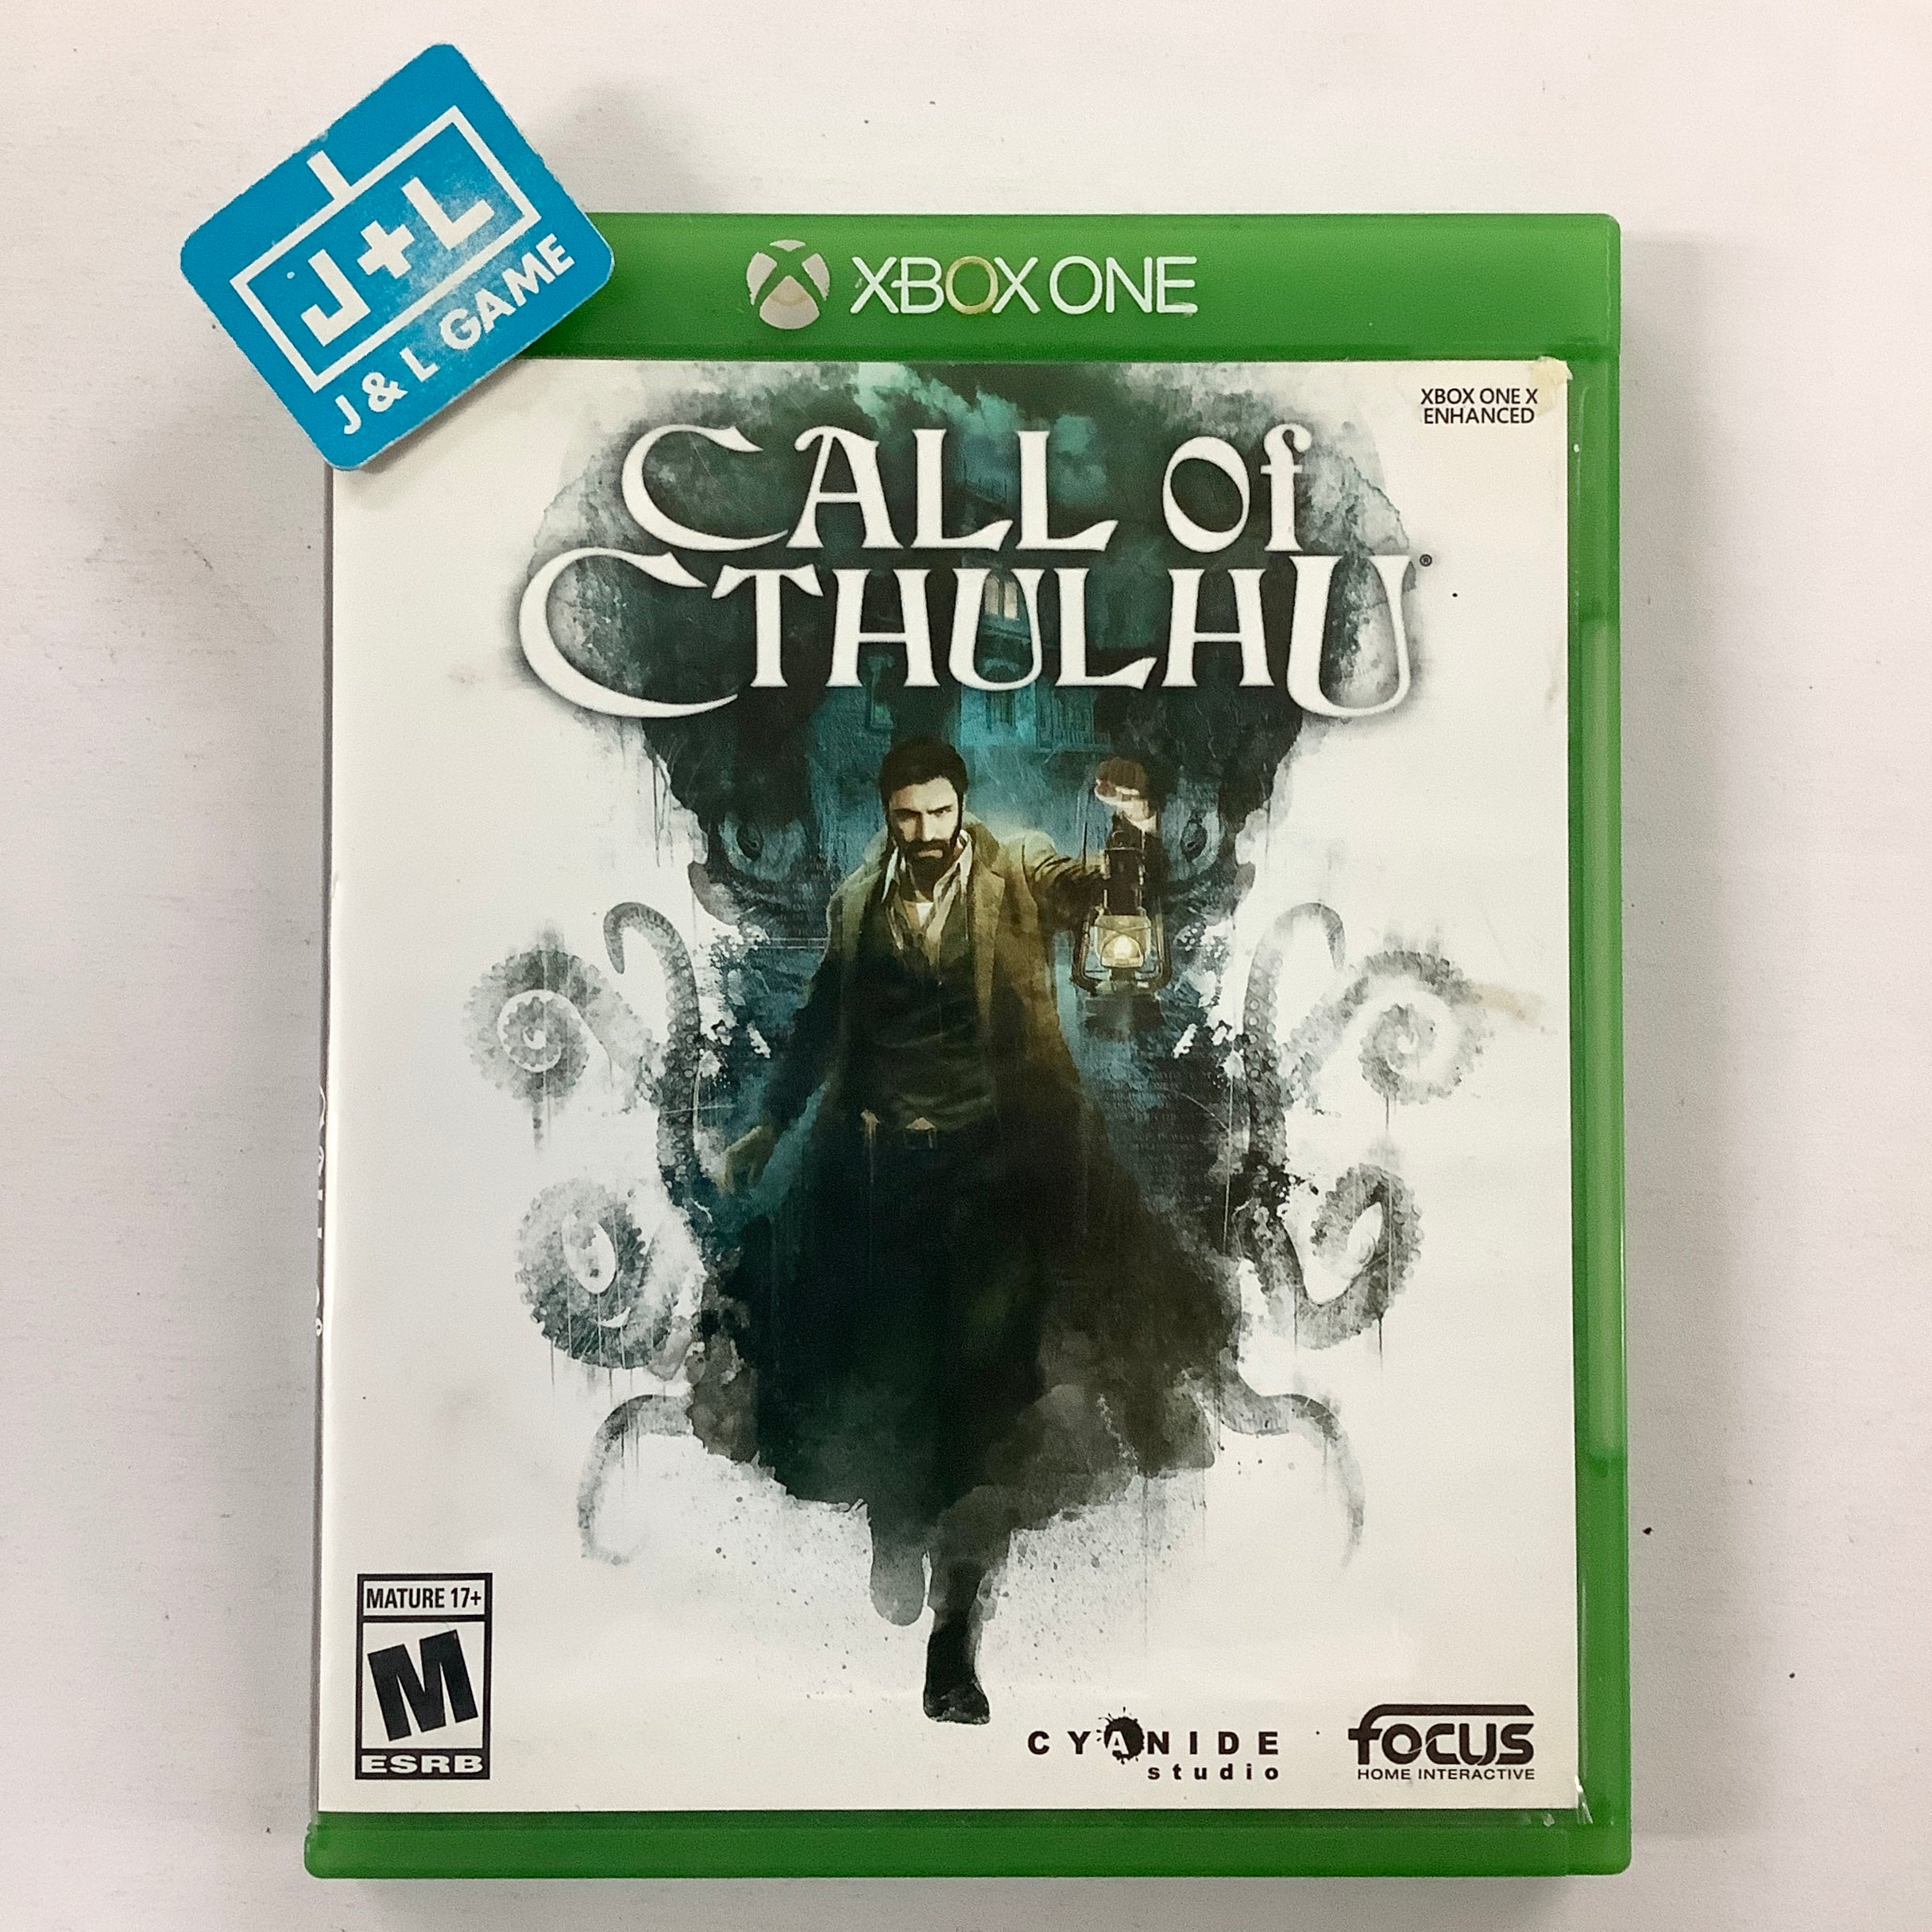 Call of Cthulhu - (XB1) Xbox One [Pre-Owned] Video Games Focus Home Interactive   